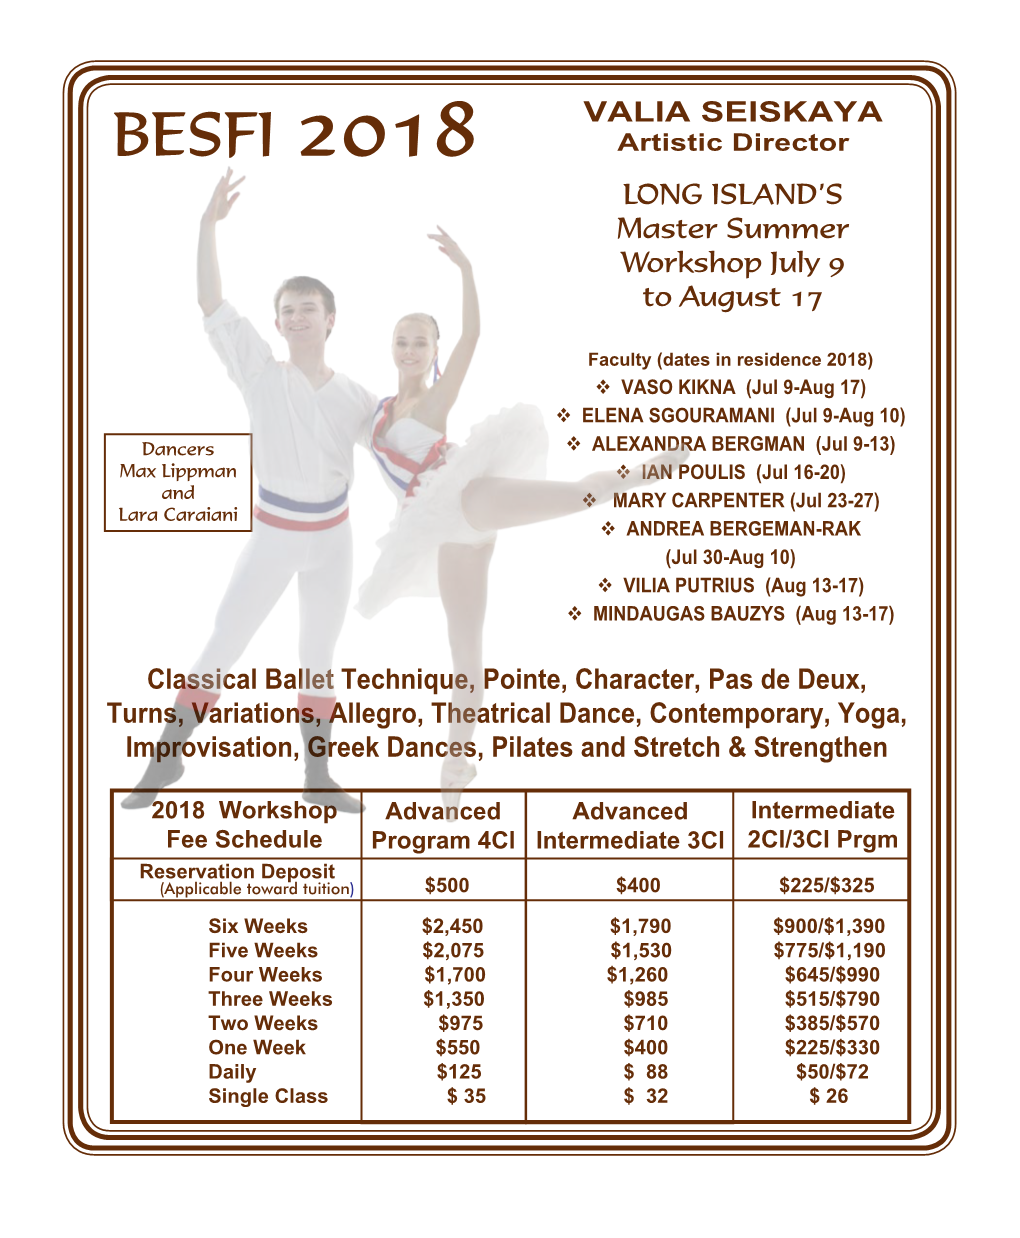 BESFI 2018 Artistic Director LONG ISLAND’S Master Summer Workshop July 9 to August 17